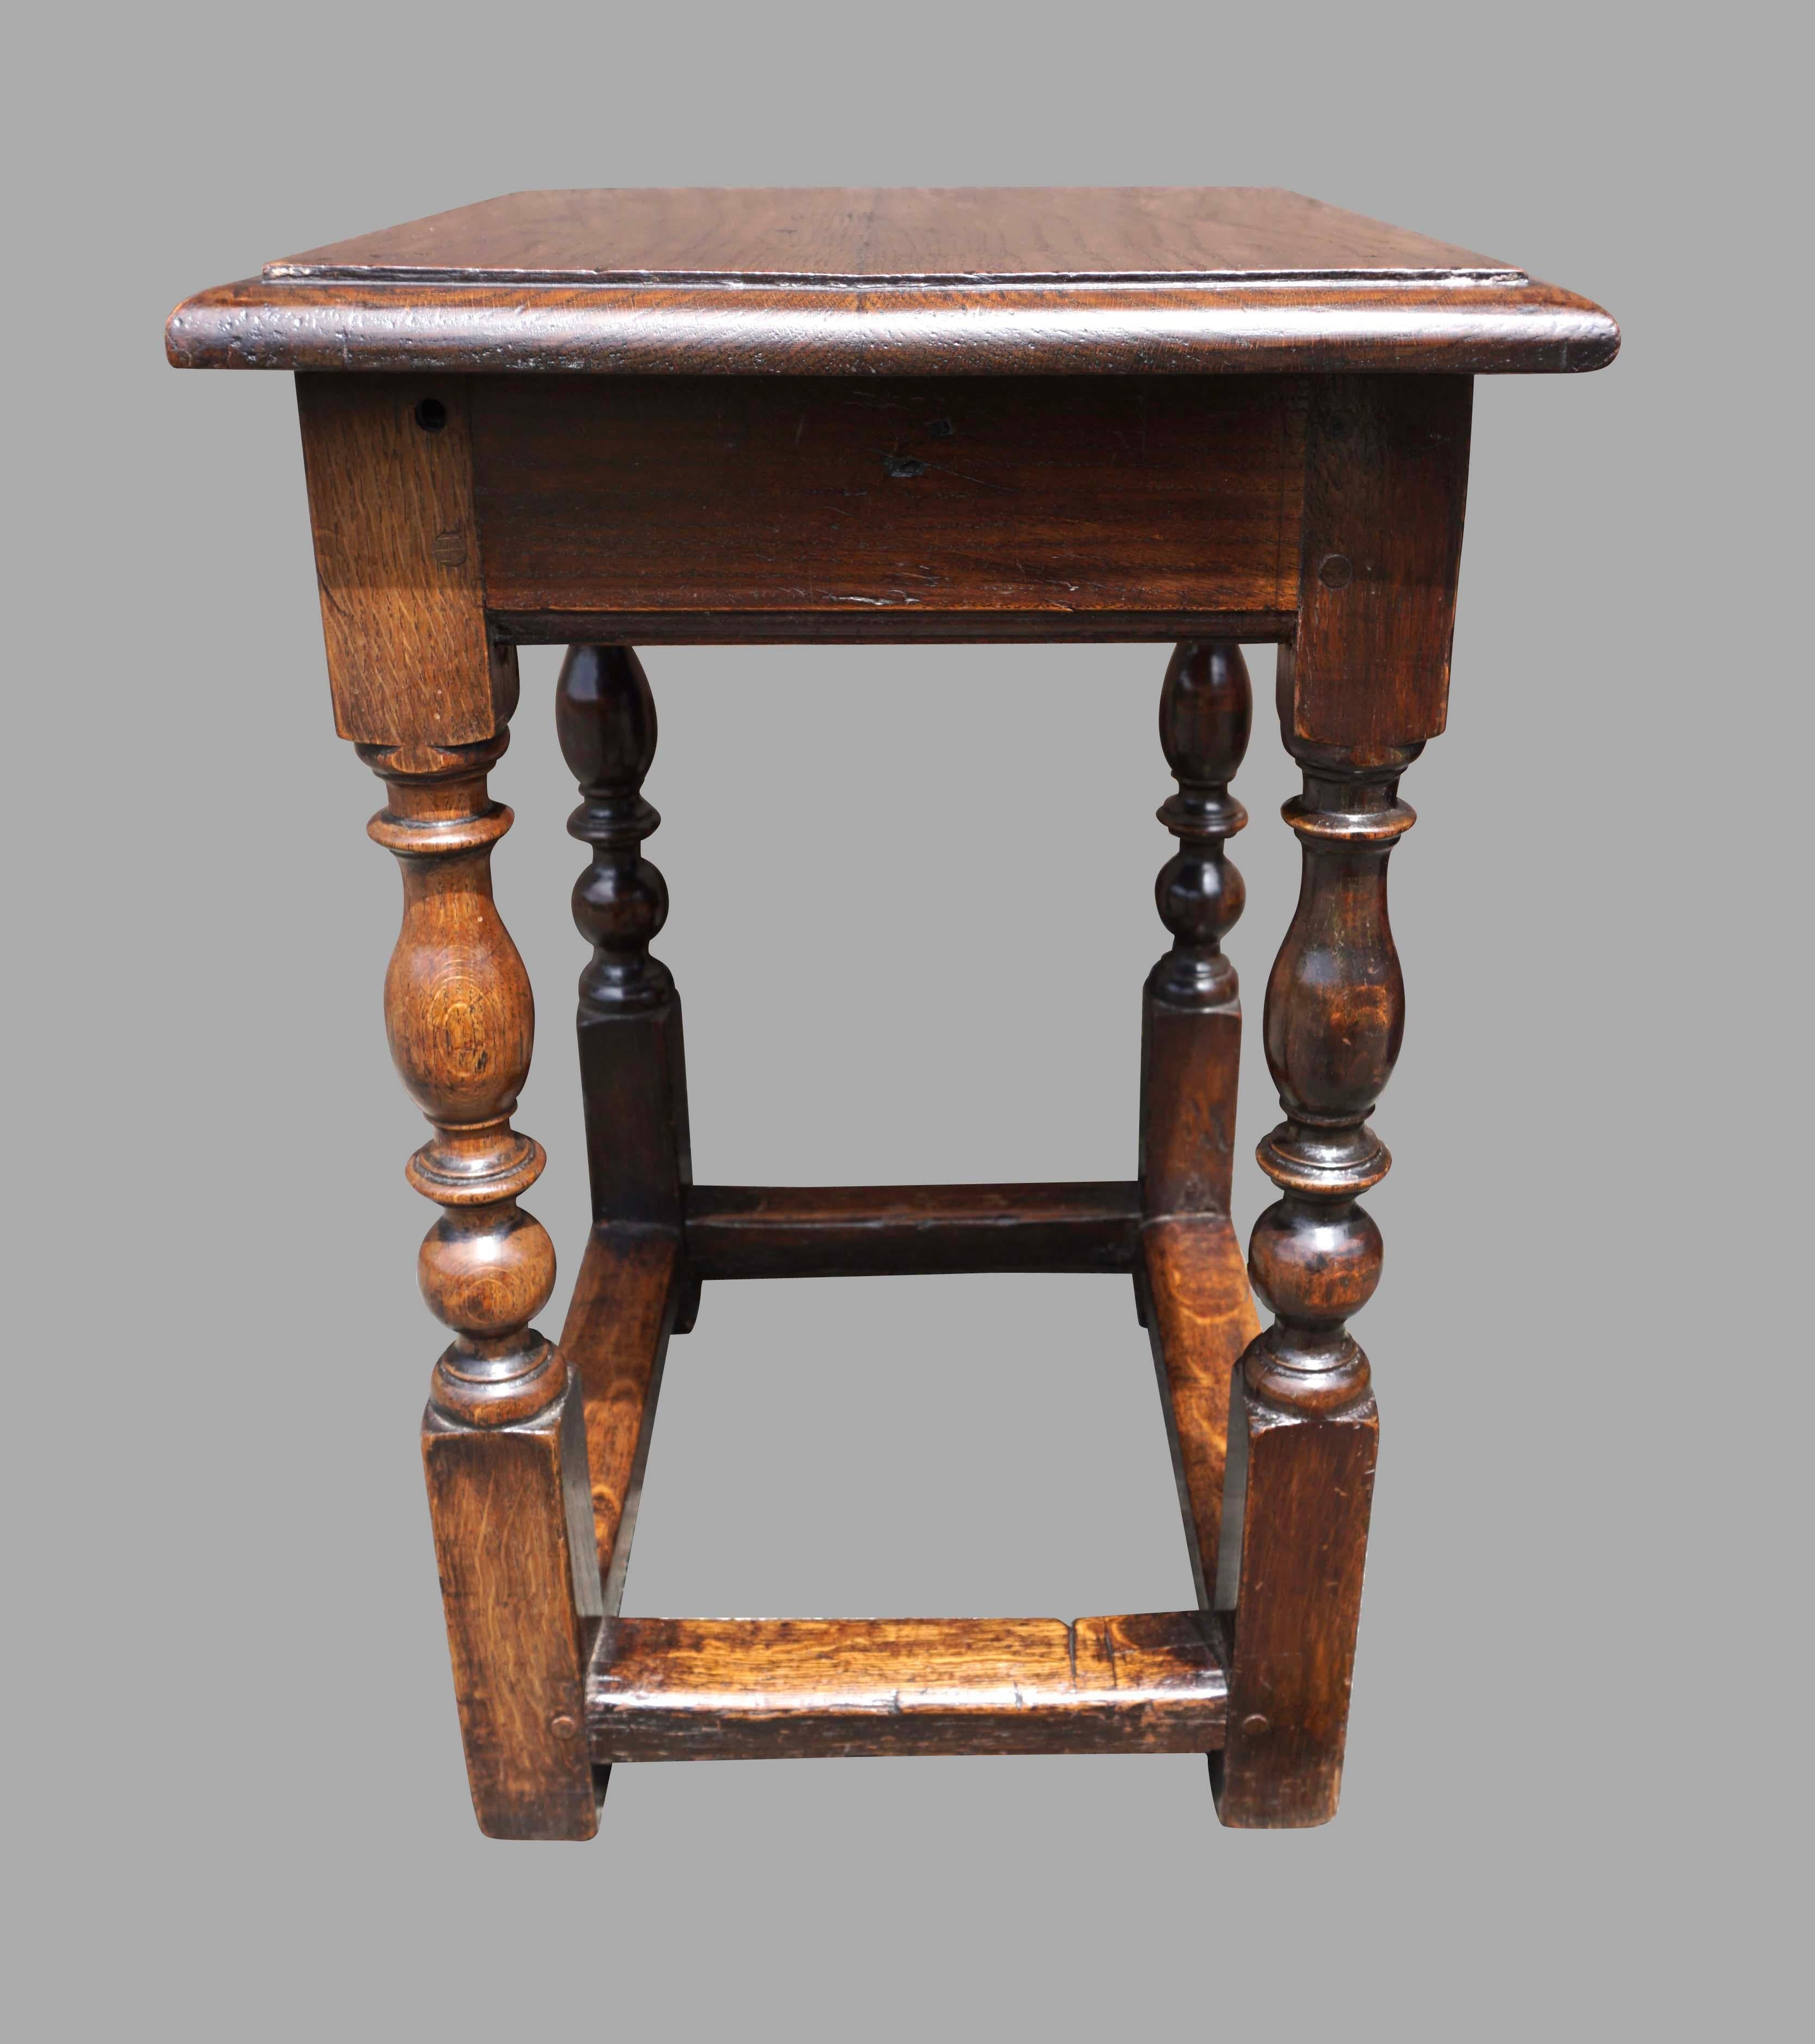 An English joint stool of typical form, the top with a molded edge above turned legs, connected by a box stretcher ending in square block feet. A charming country English stool which is useable as an occasional table as well. Old repairs, top